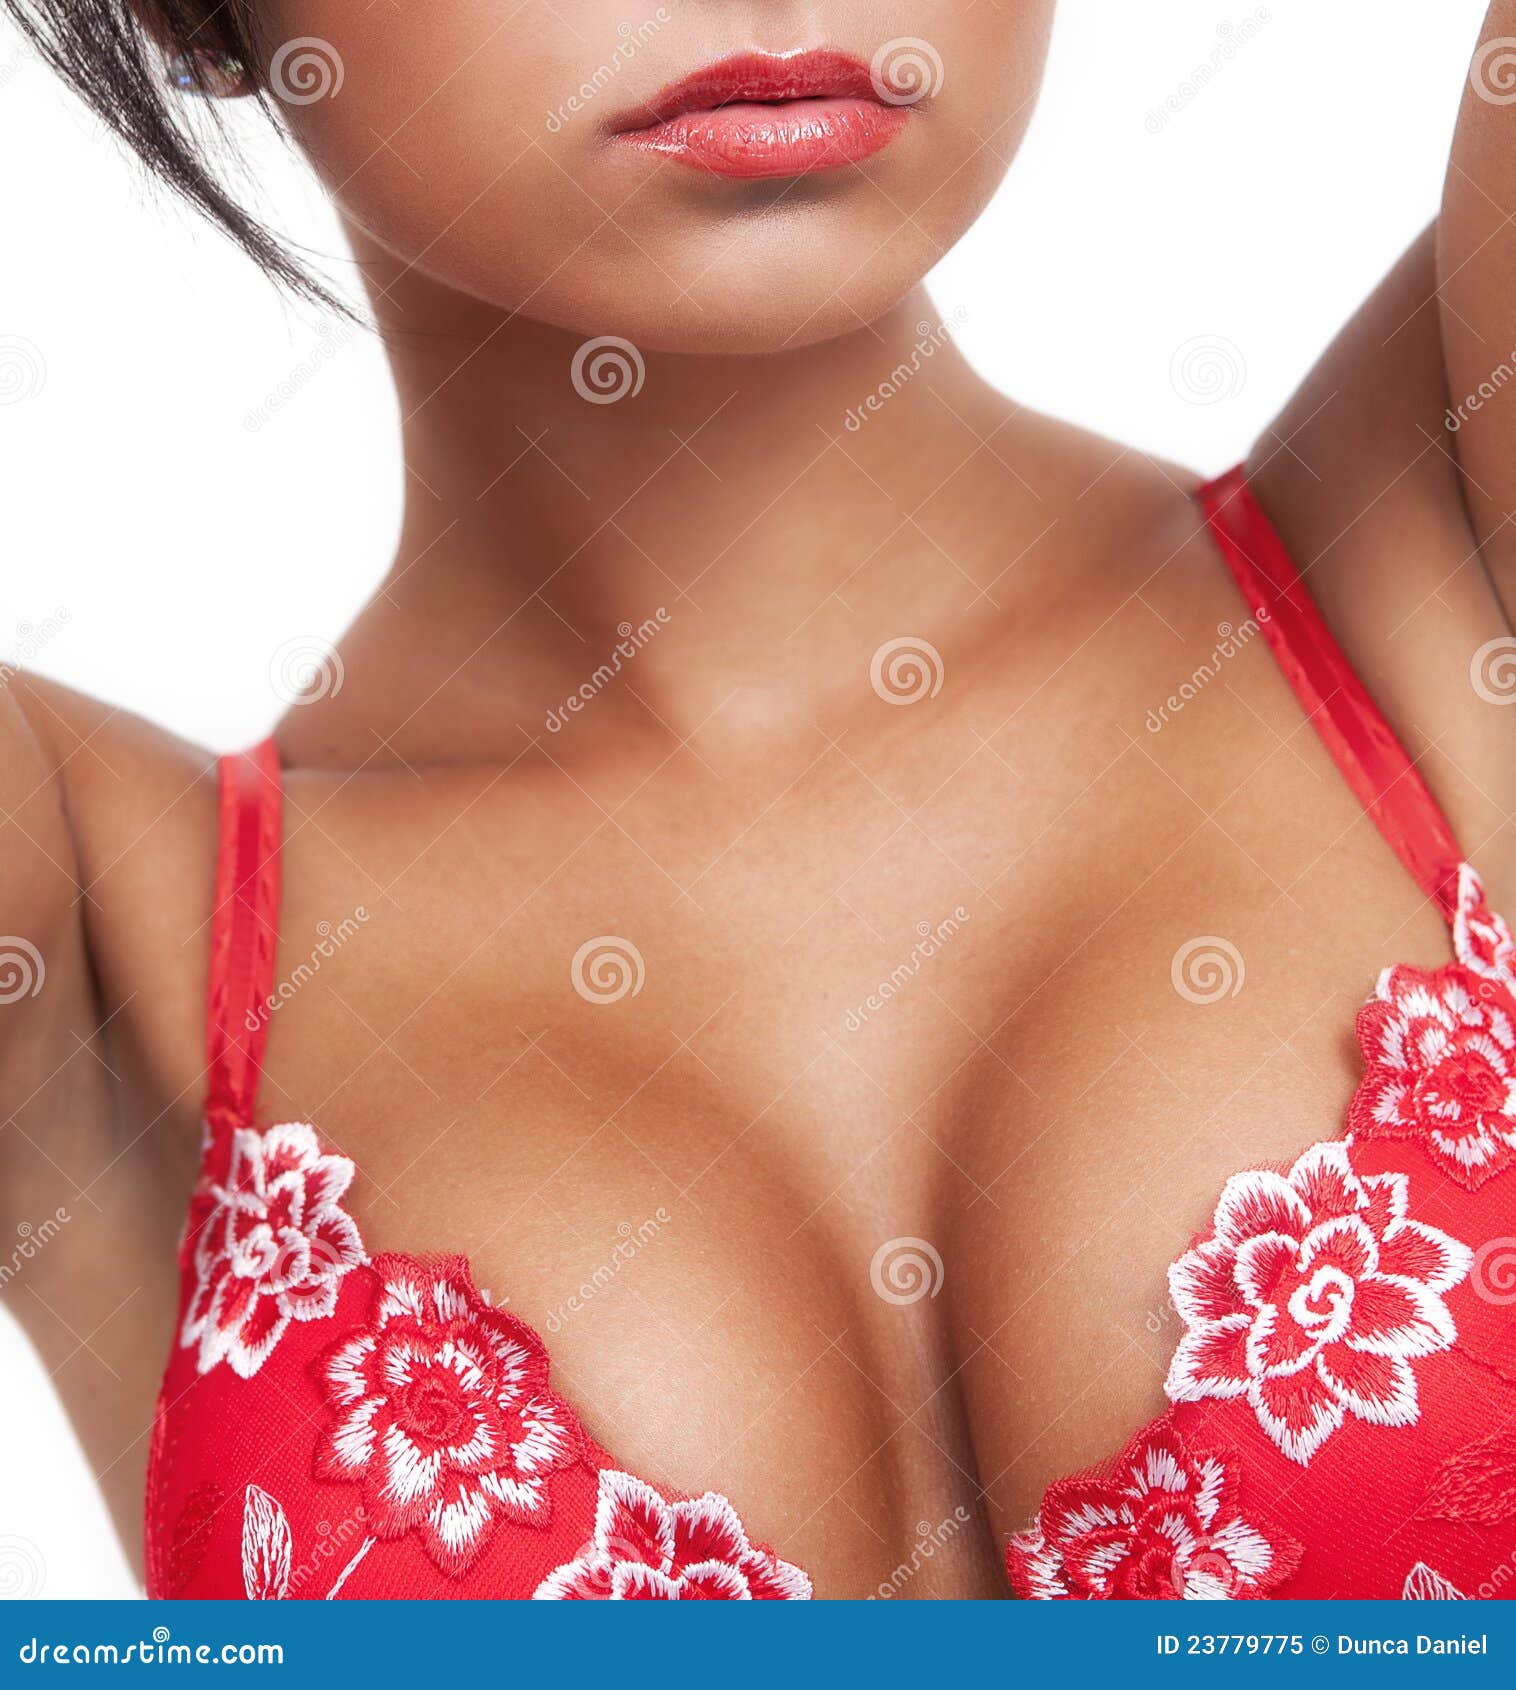 Woman with Hot Breasts in Lingerie Stock Image - Image of boobs, figure:  23779775